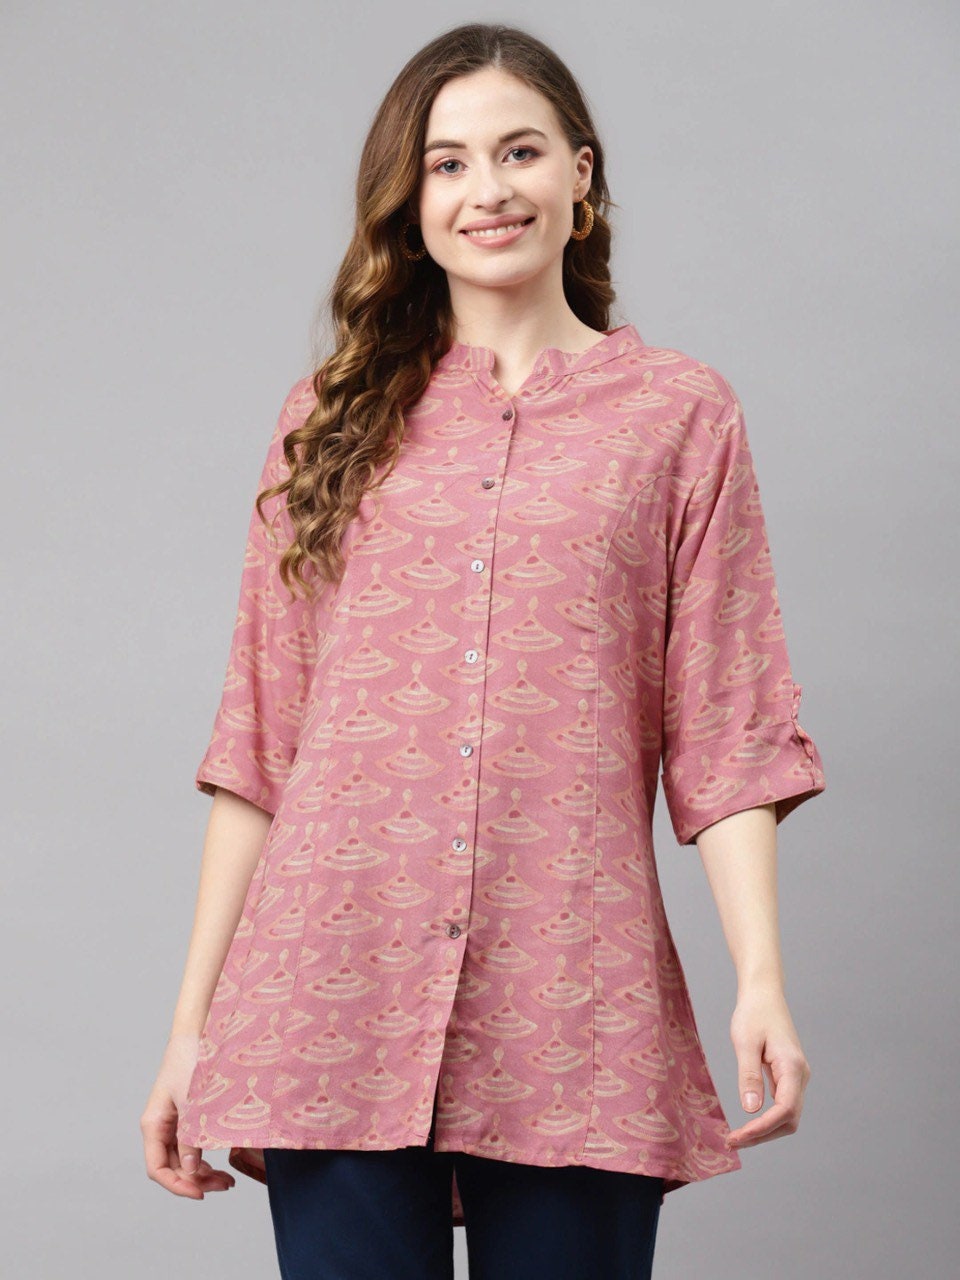 Indian Summer Tops Tees Women Blue Printed Empire Top A-line Tunic